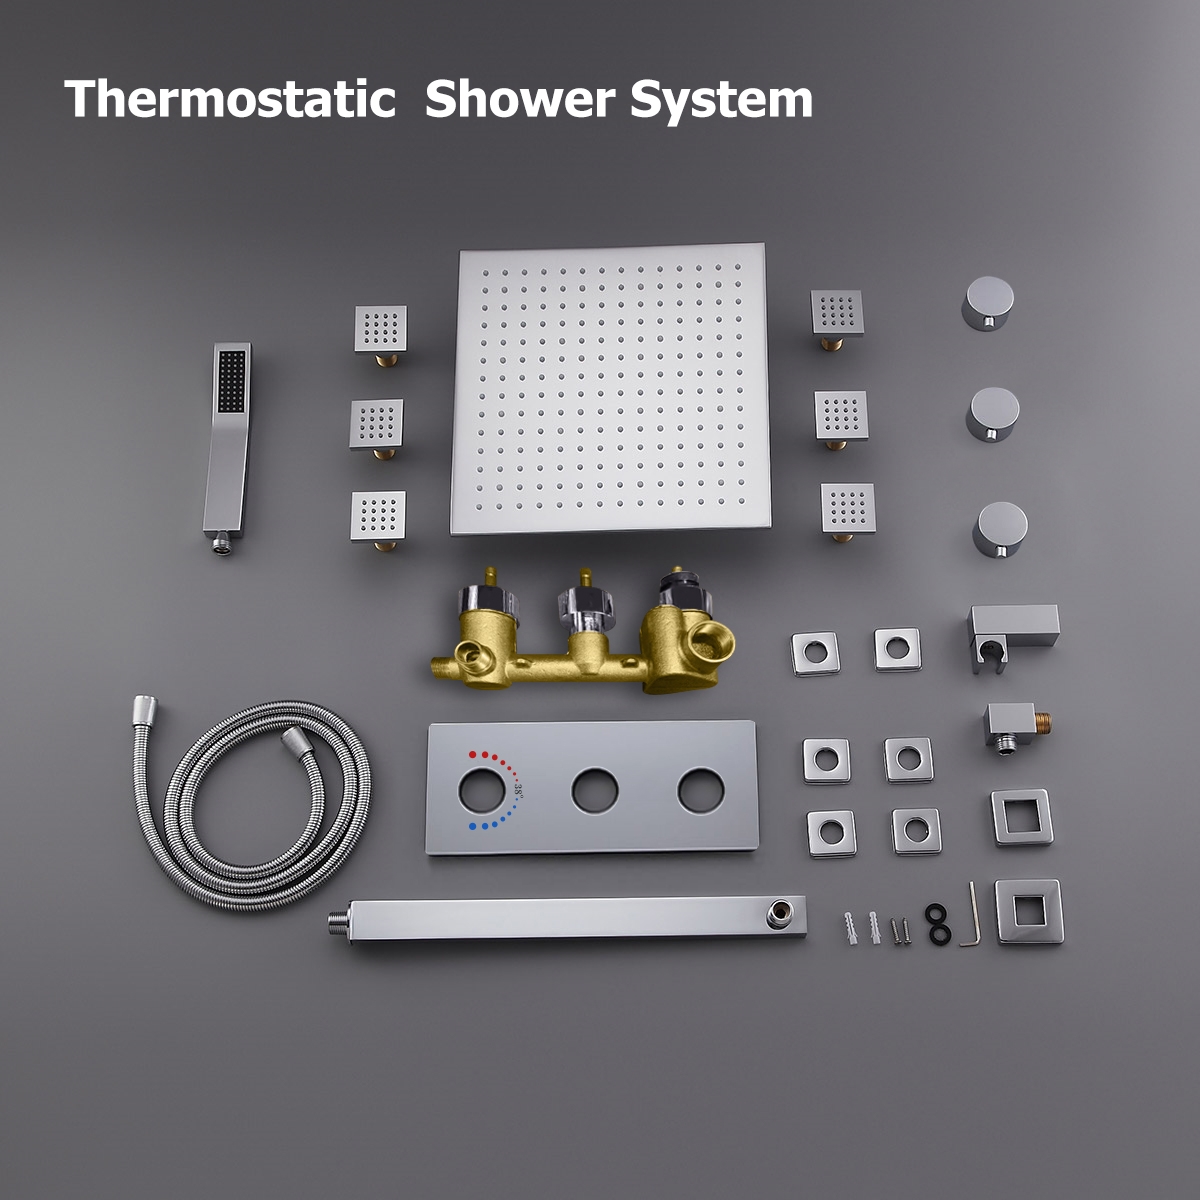 Modern LED Wall Mount 12" Rain Head with Hanshower & Body Spray Jets Thermostatic Shower Set in Polished Chrome Solid Brass